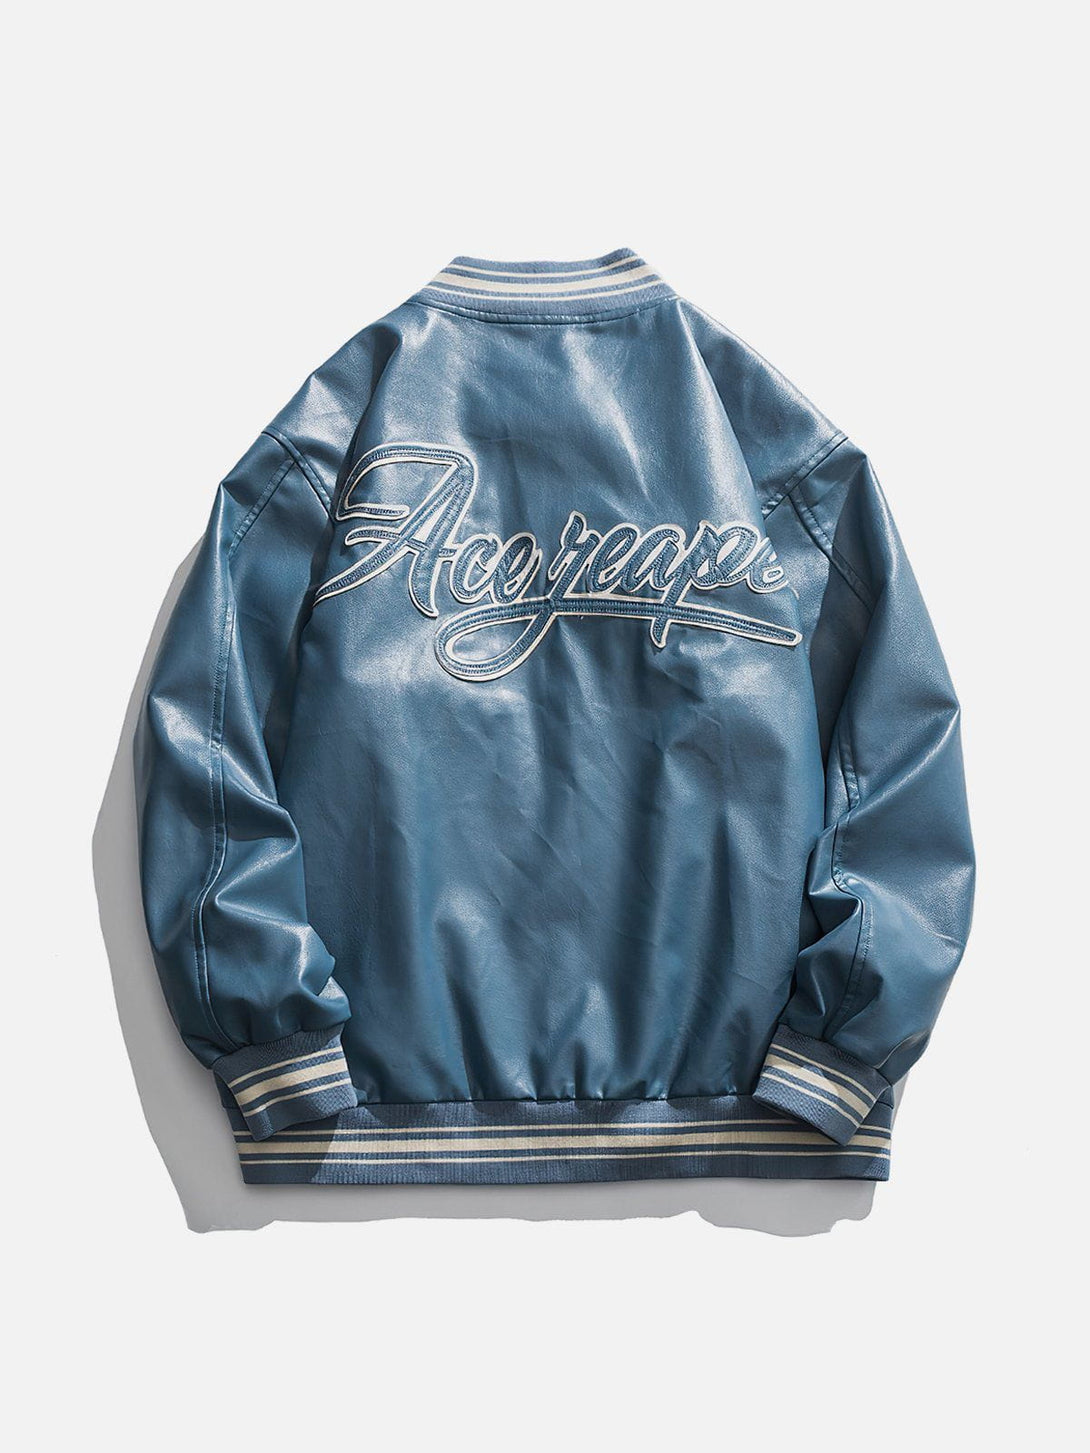 Levefly - 3D Letter Embroidery Jacket - Streetwear Fashion - levefly.com